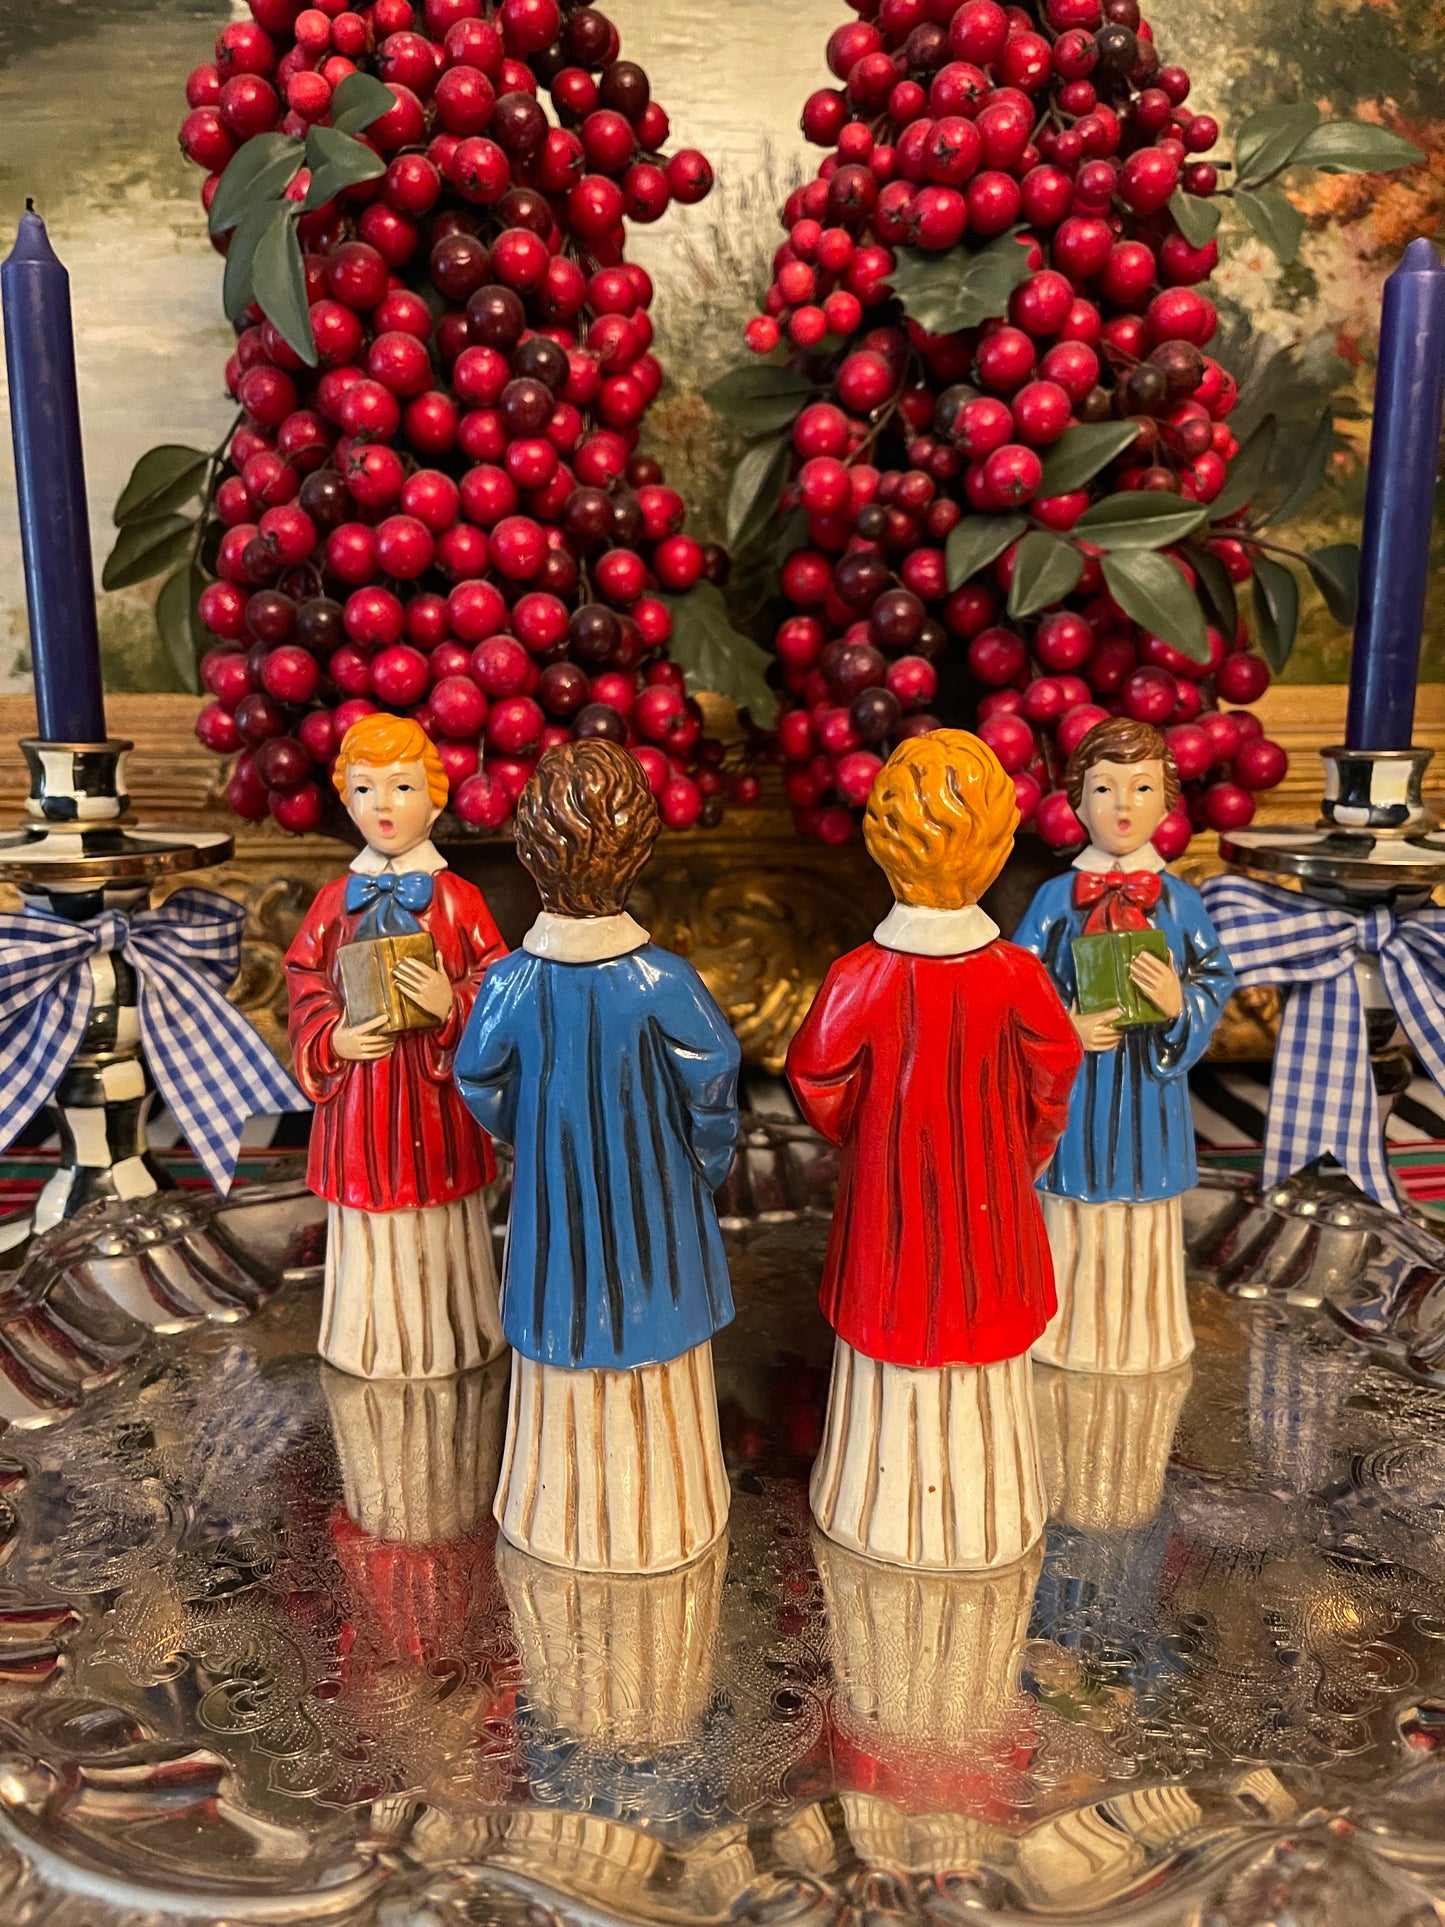 Vintage Paper Mache Choir Boys/Carolers, Sold in Pairs, Vintage Christmas Decor, Made in Japan